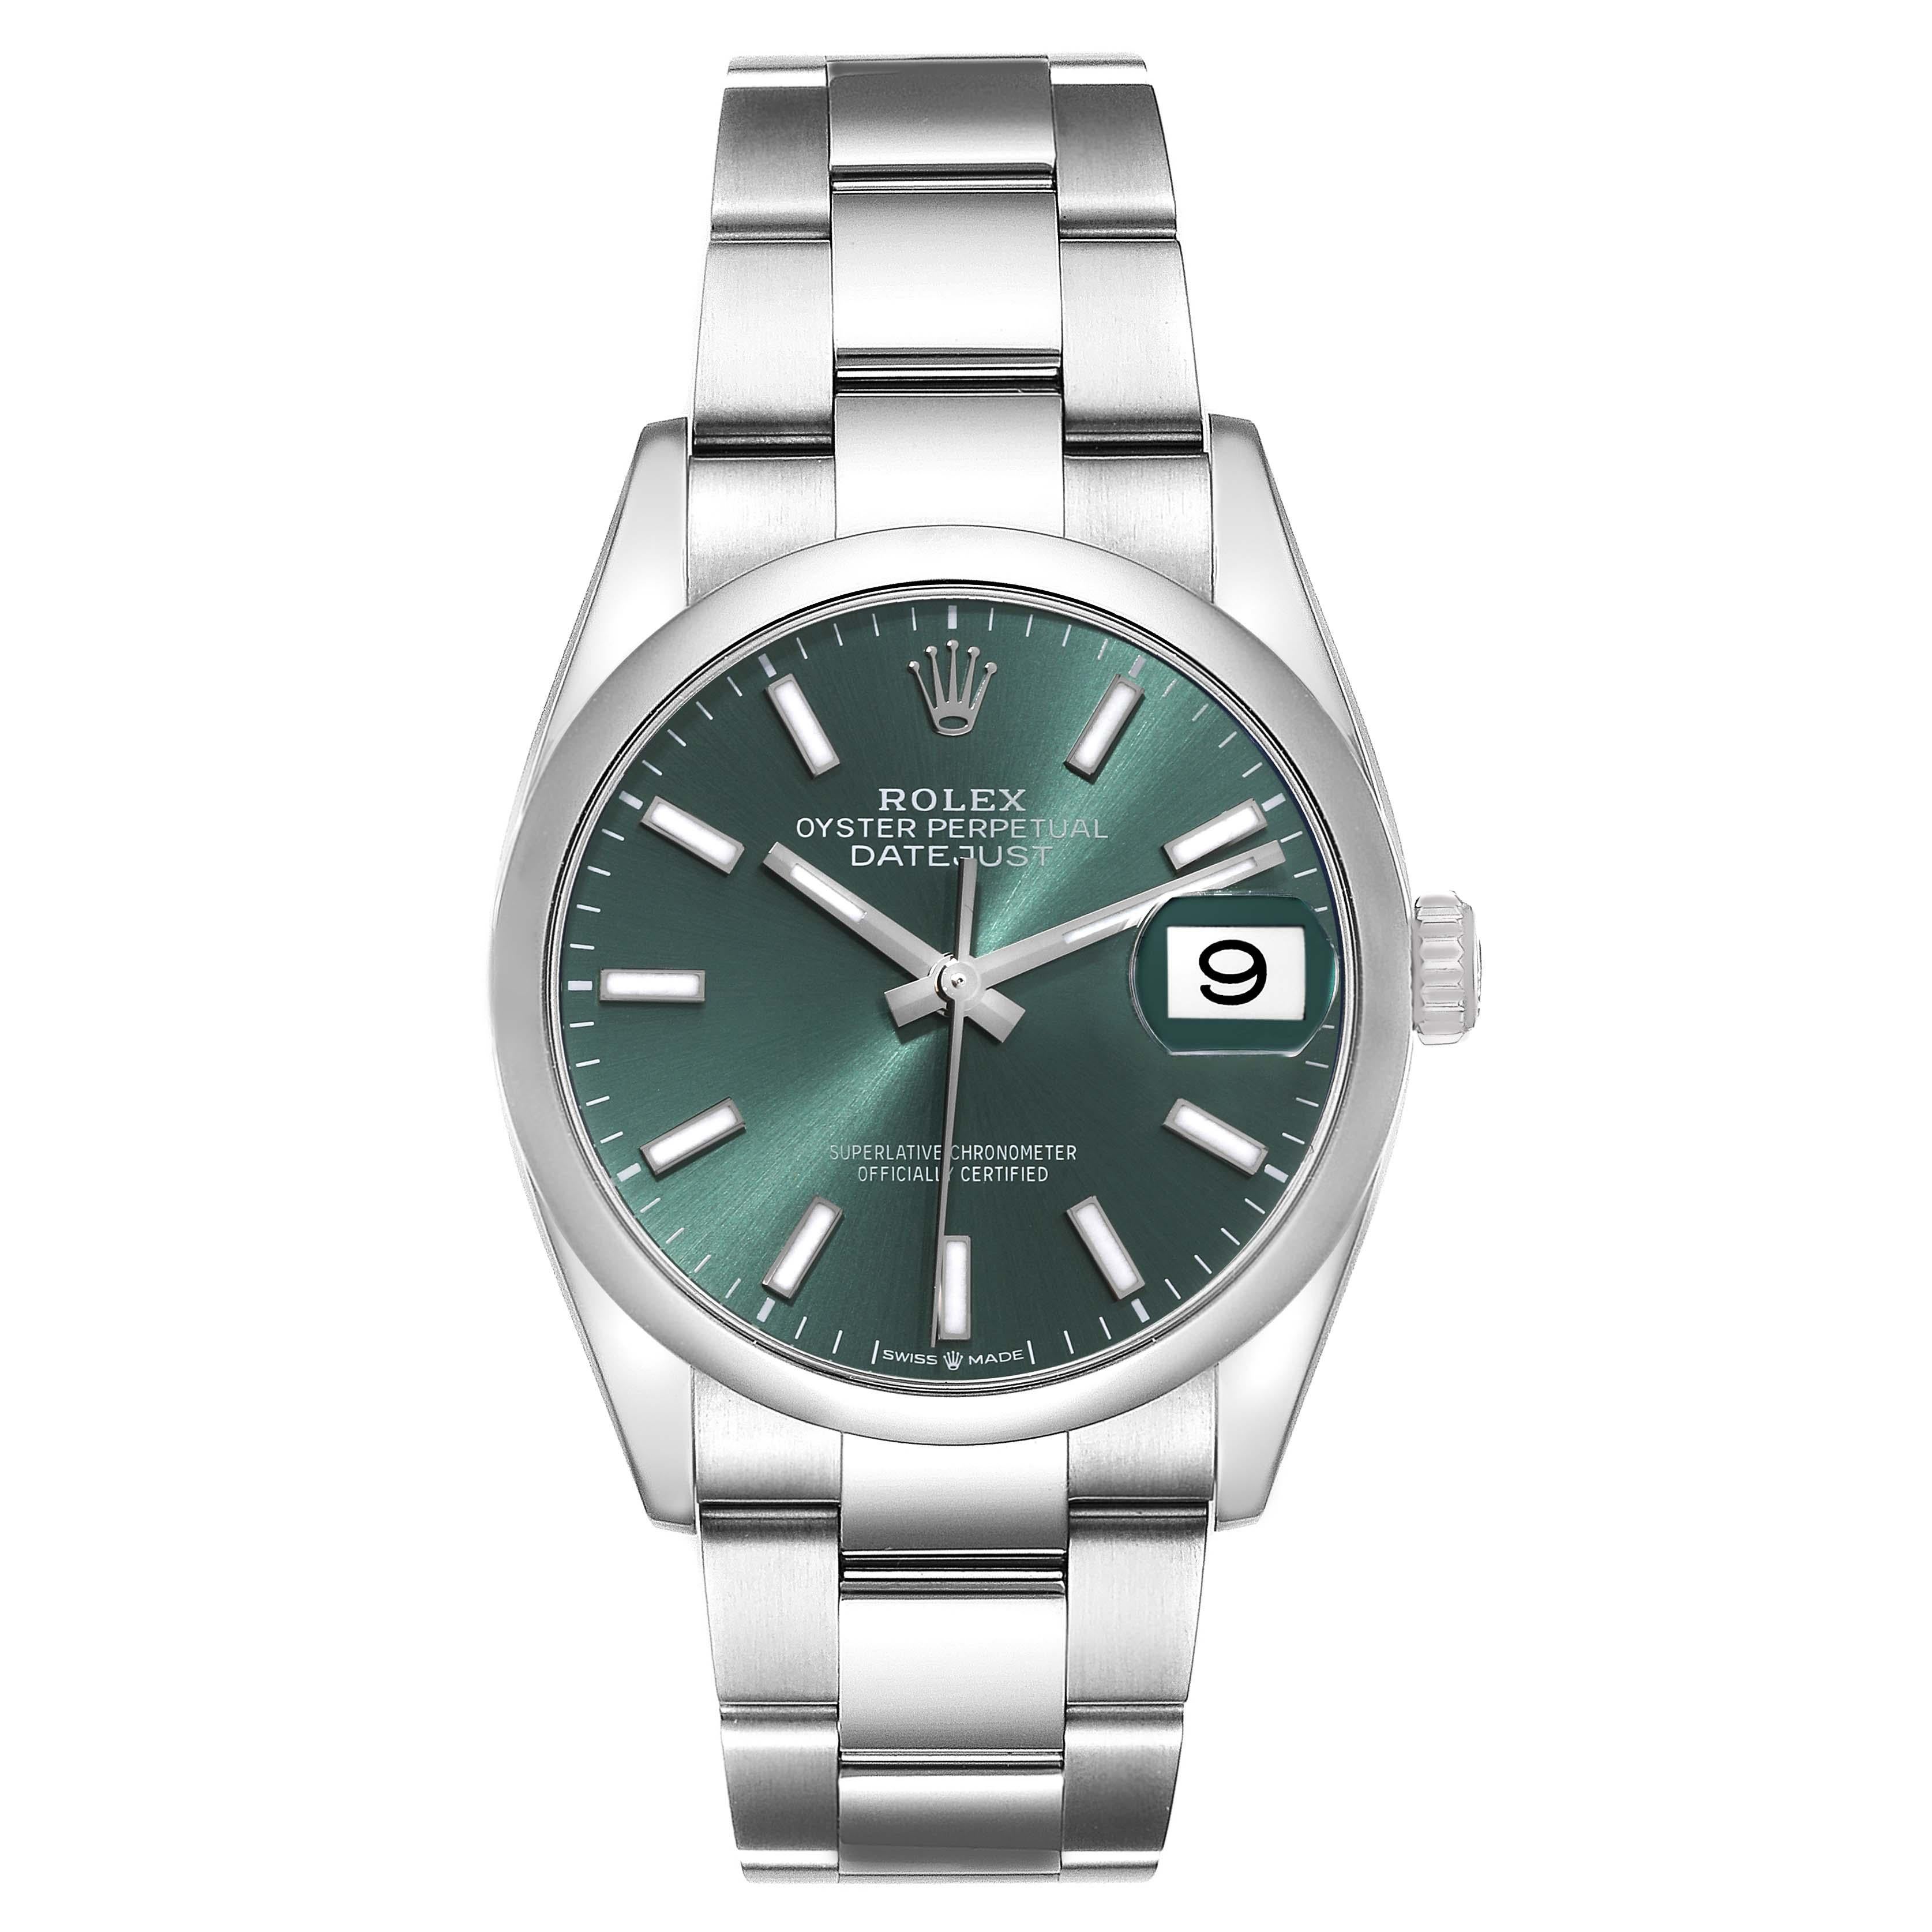 Rolex Datejust Mint Green Dial Domed Bezel Steel Mens Watch 126200 Unworn. Officially certified chronometer self-winding movement. Stainless steel case 36.0 mm in diameter. Rolex logo on a crown. Stainless steel smooth domed bezel. Scratch resistant